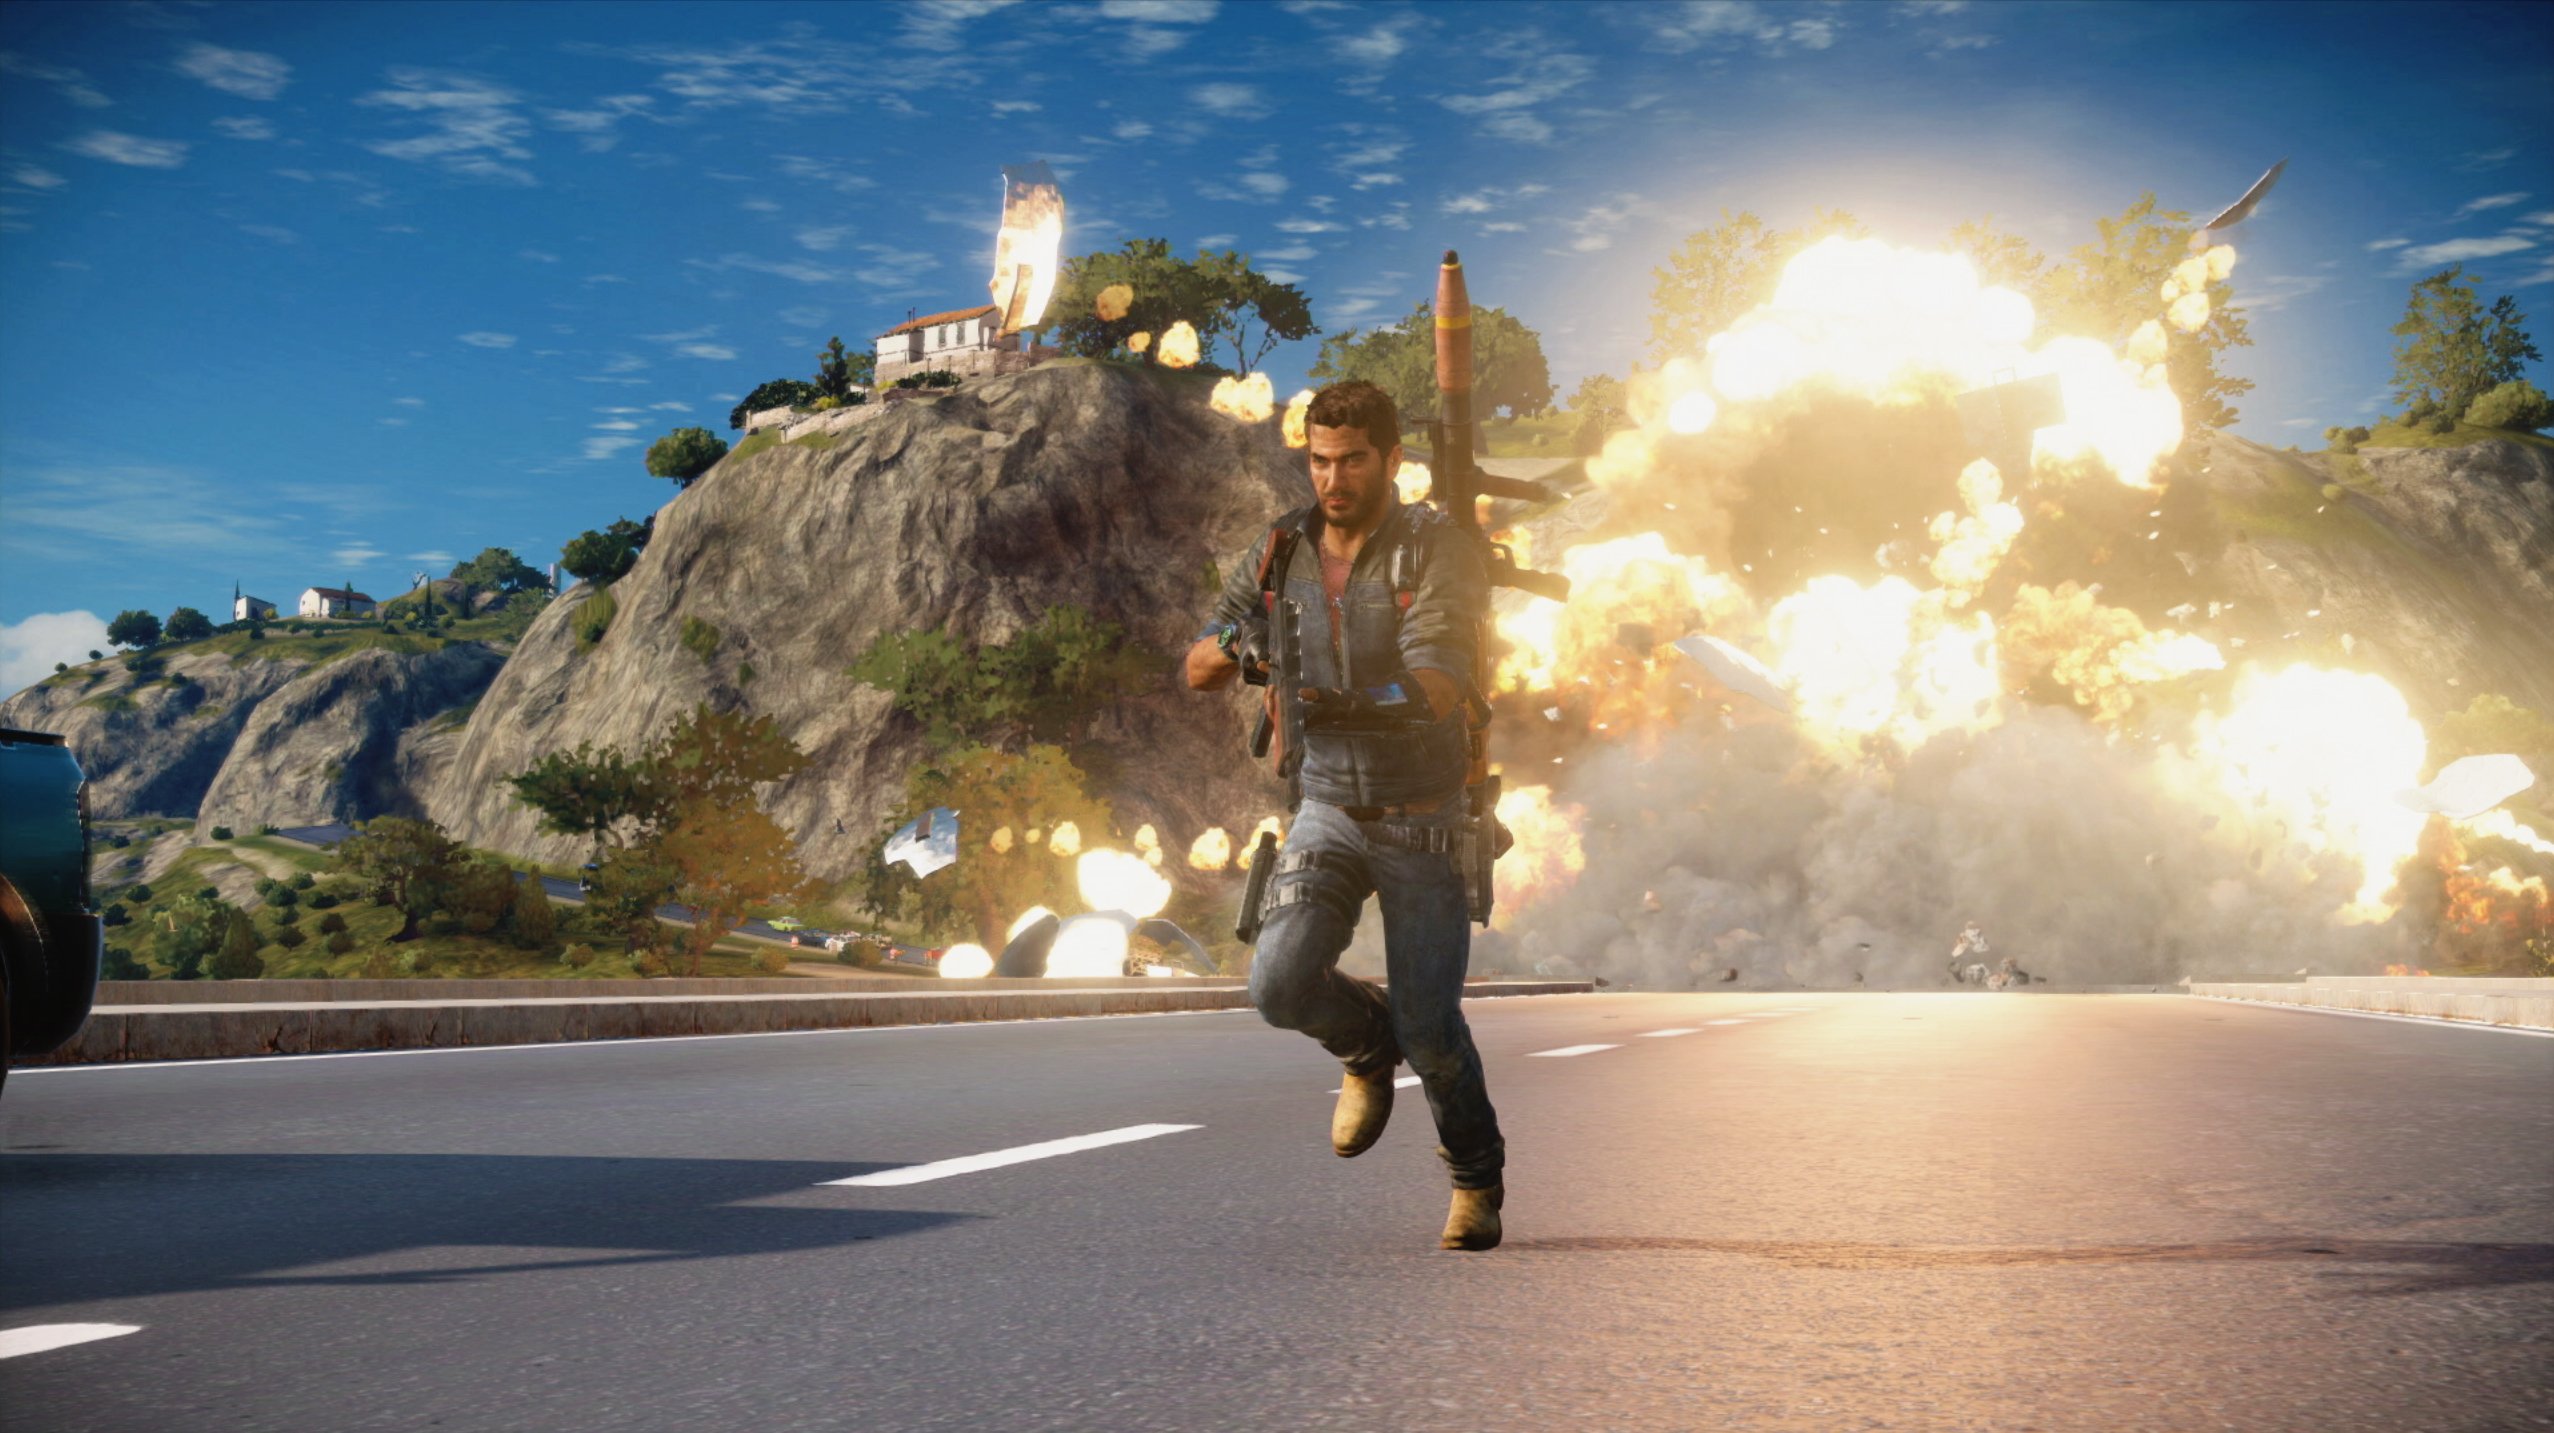 Just Cause 3 - PlayStation 4